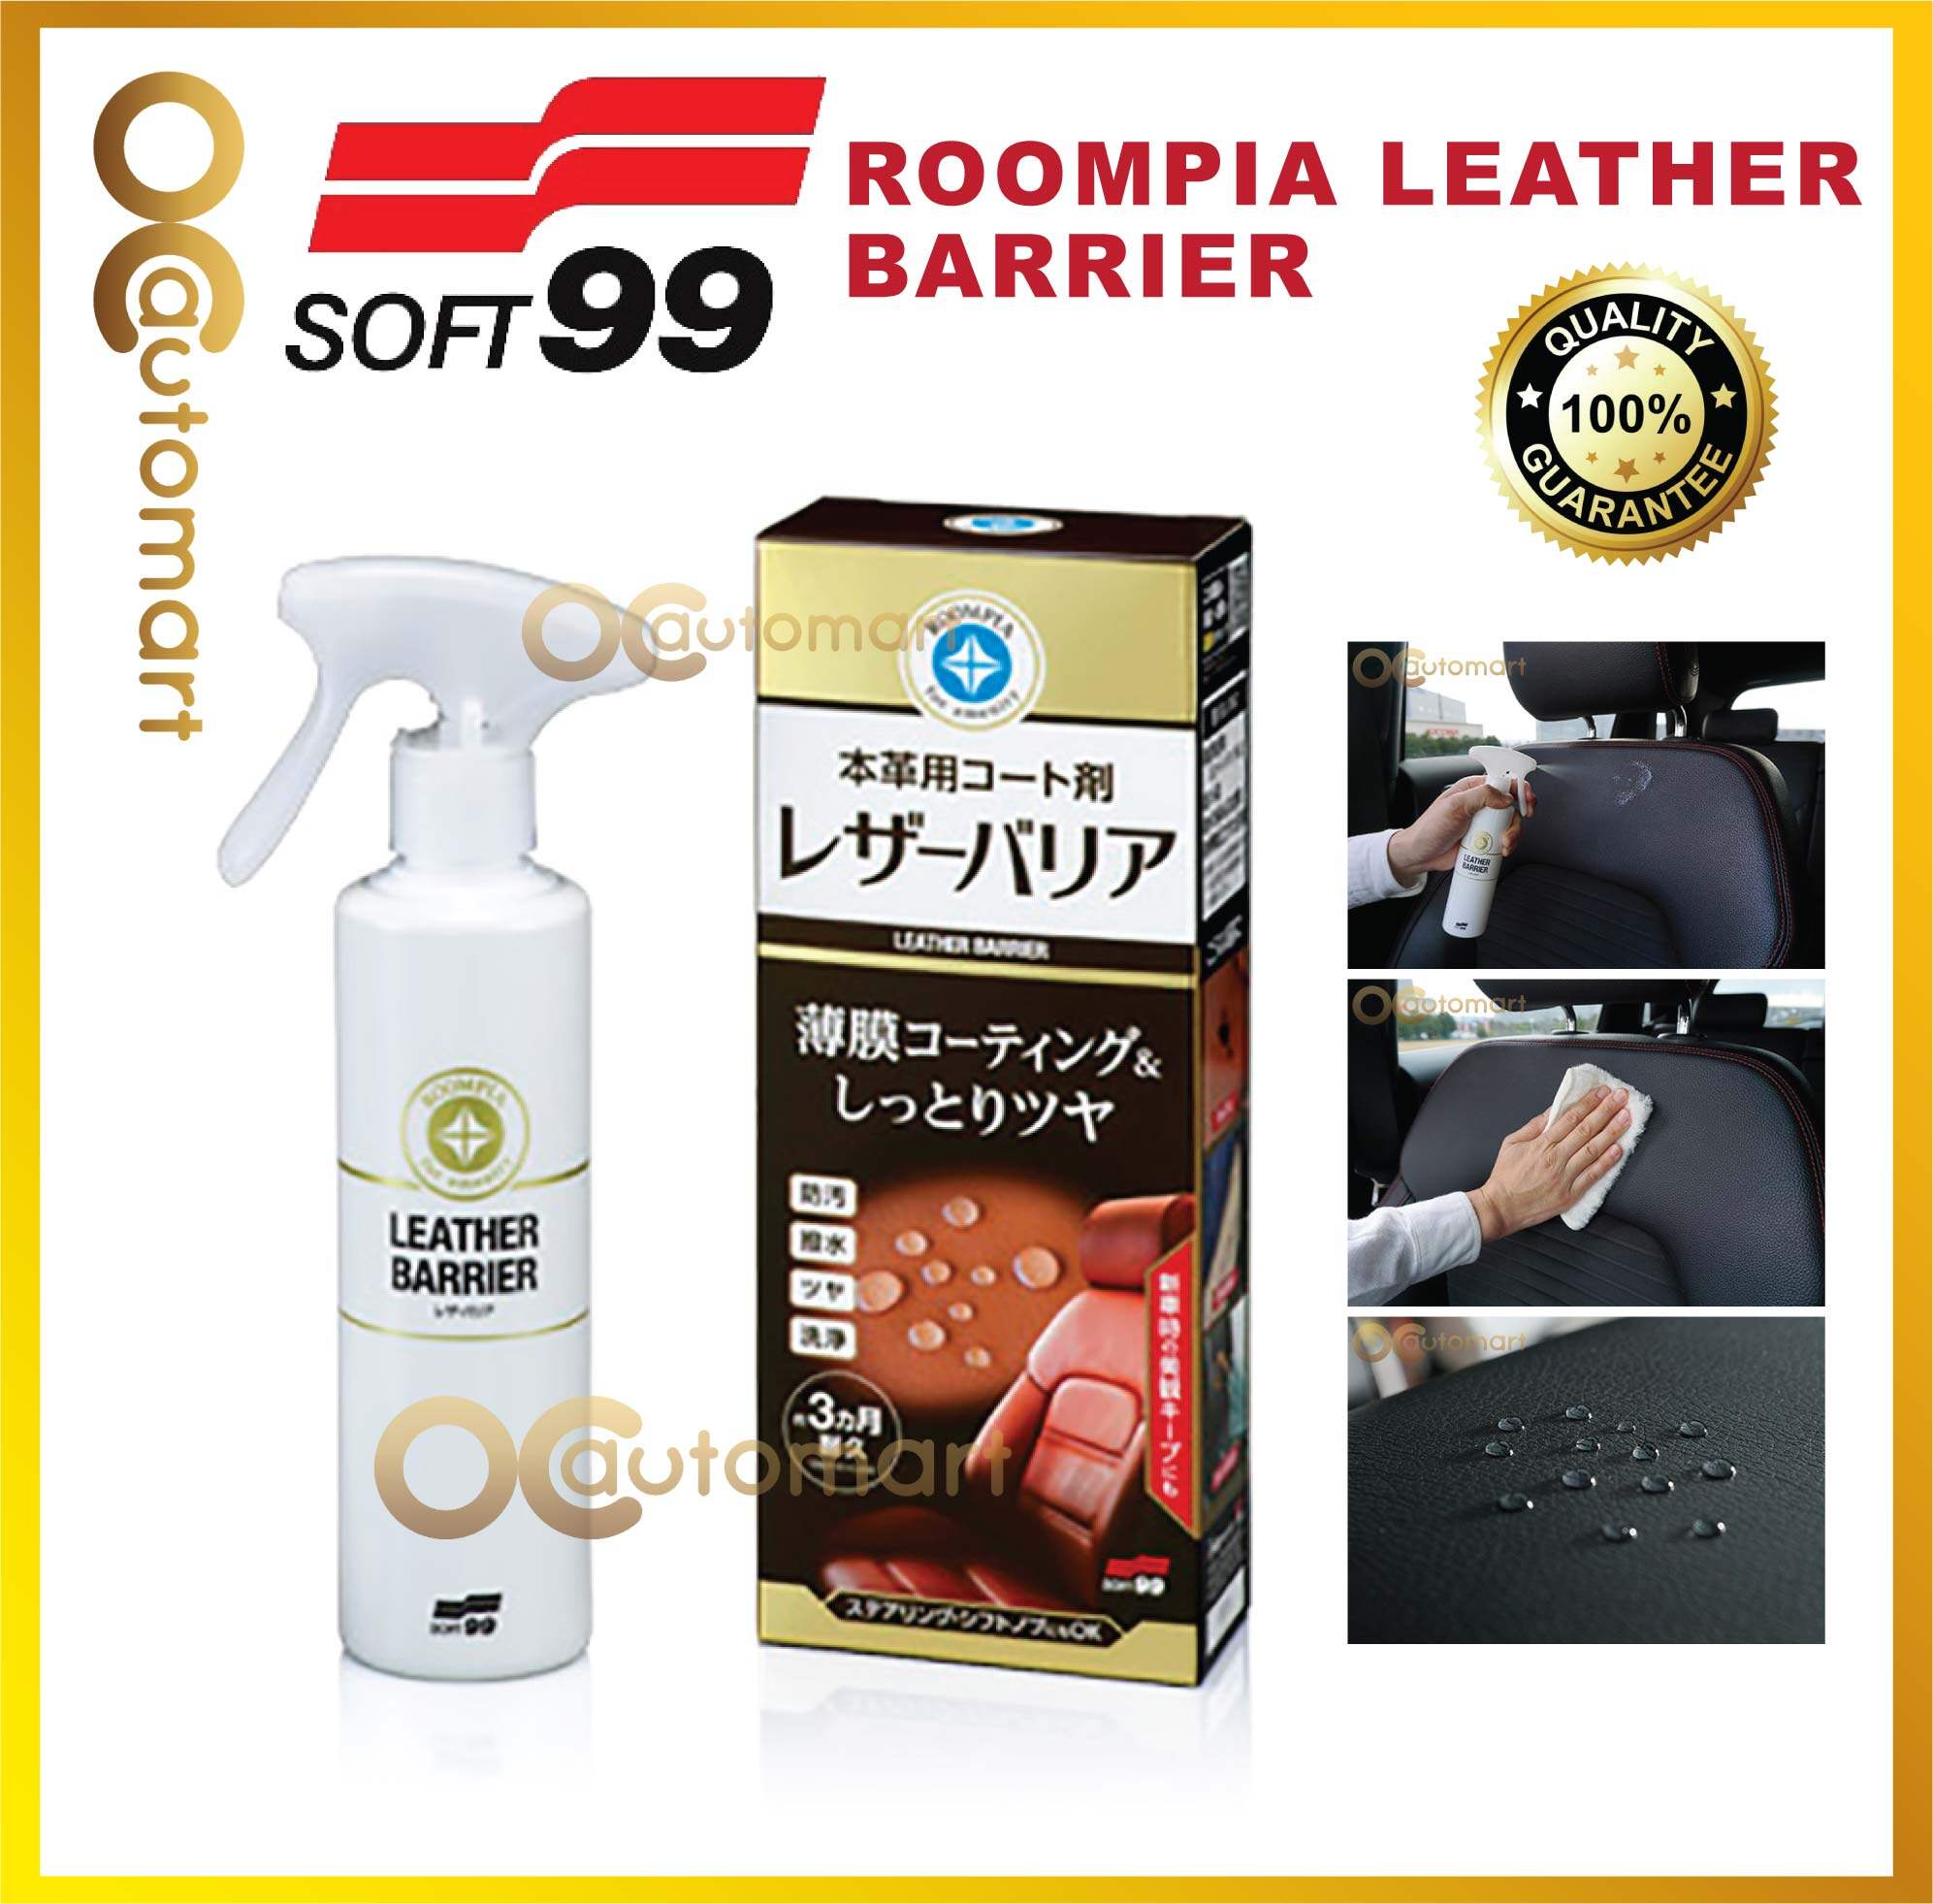 ( Free Gift ) Soft99 / Soft 99 Roompia Leather Barrier - 230ml